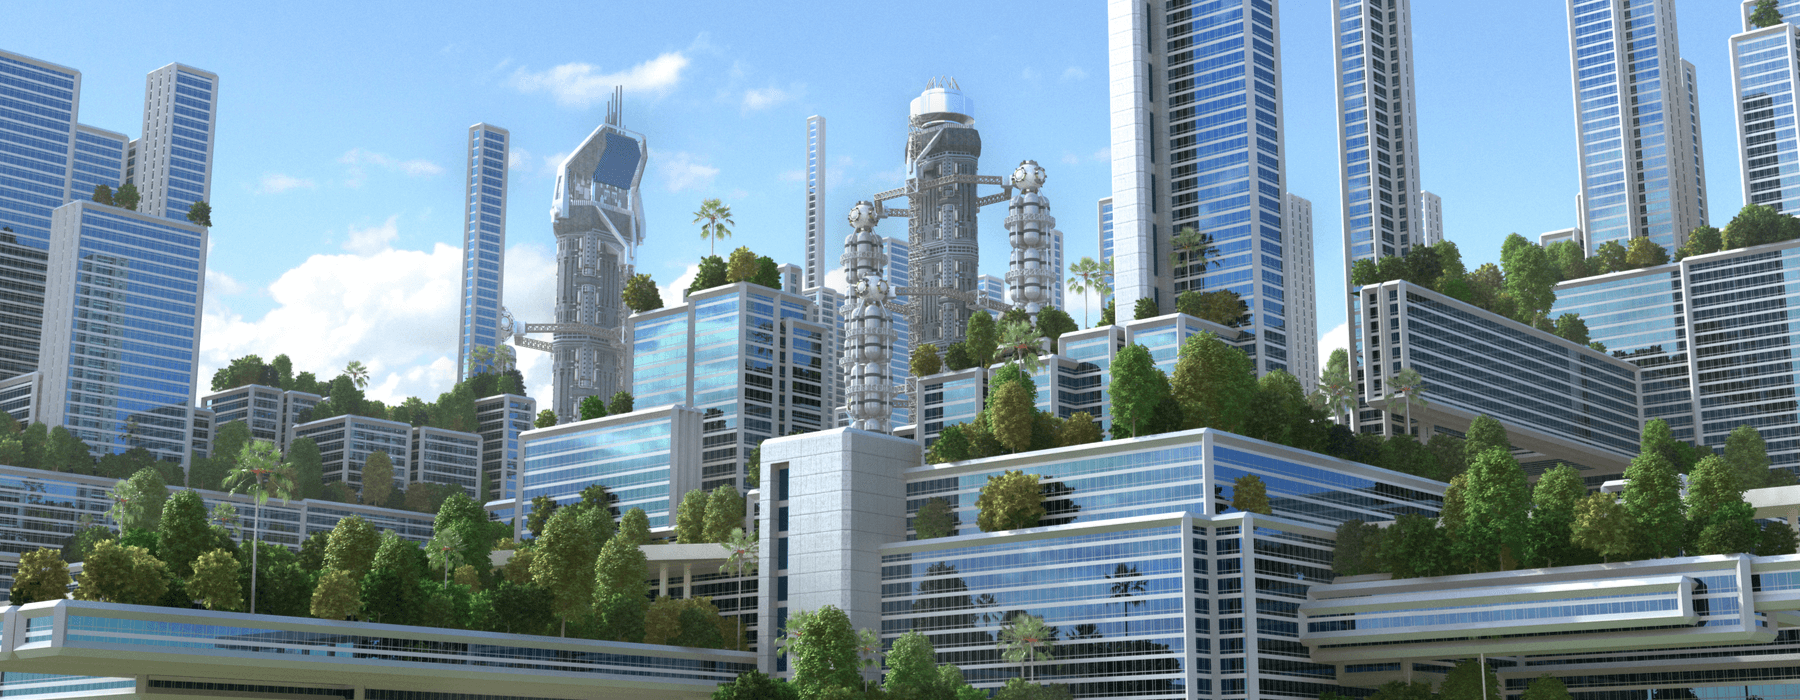 5 Business Advantages of Green Buildings